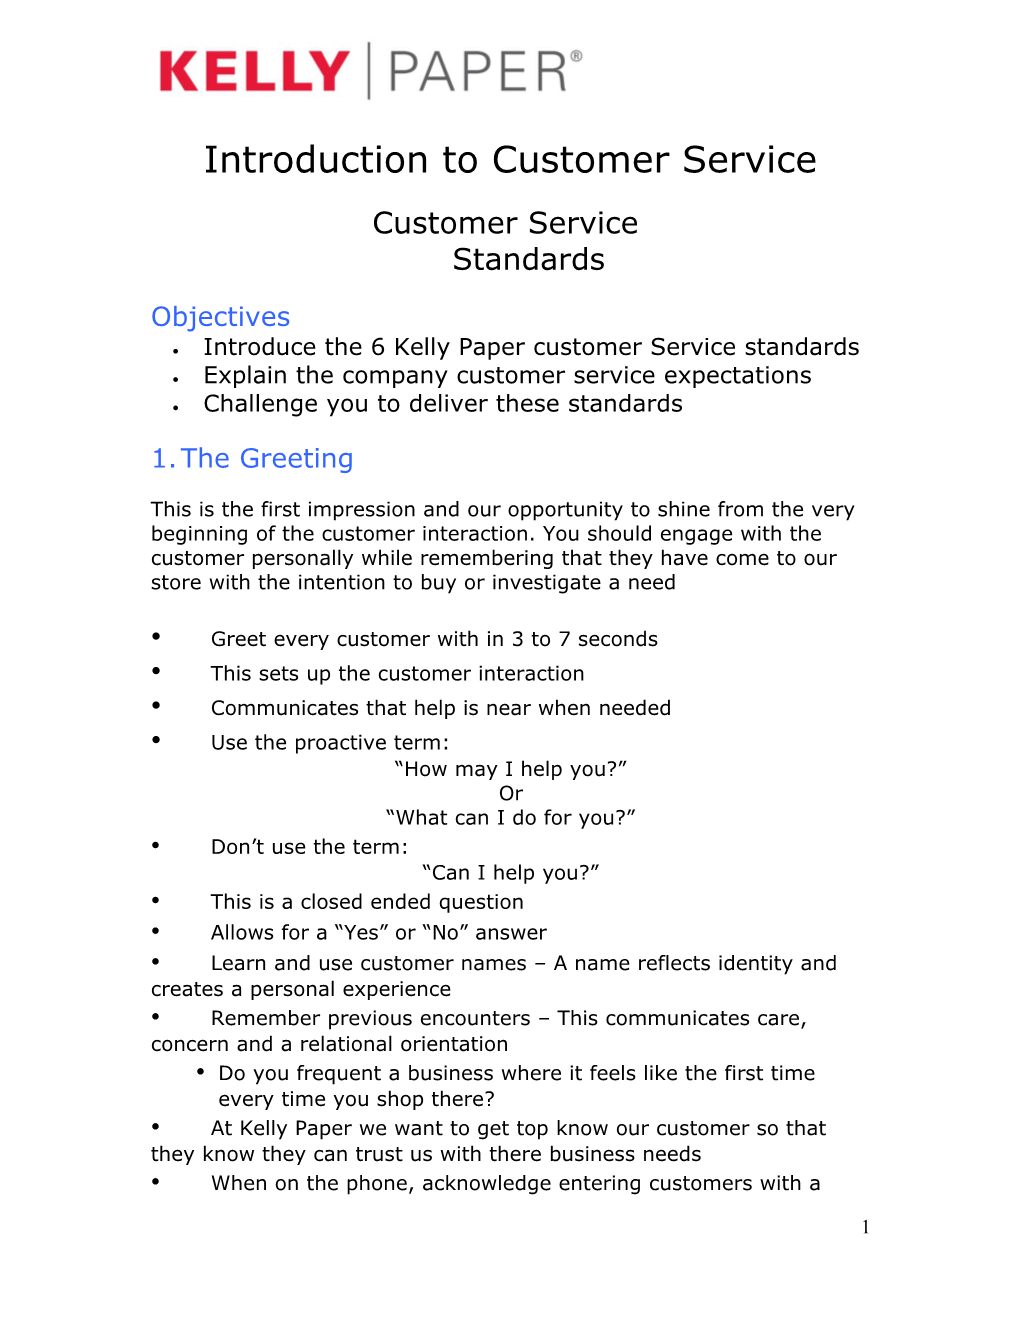 Introduce the 6 Kelly Paper Customer Service Standards